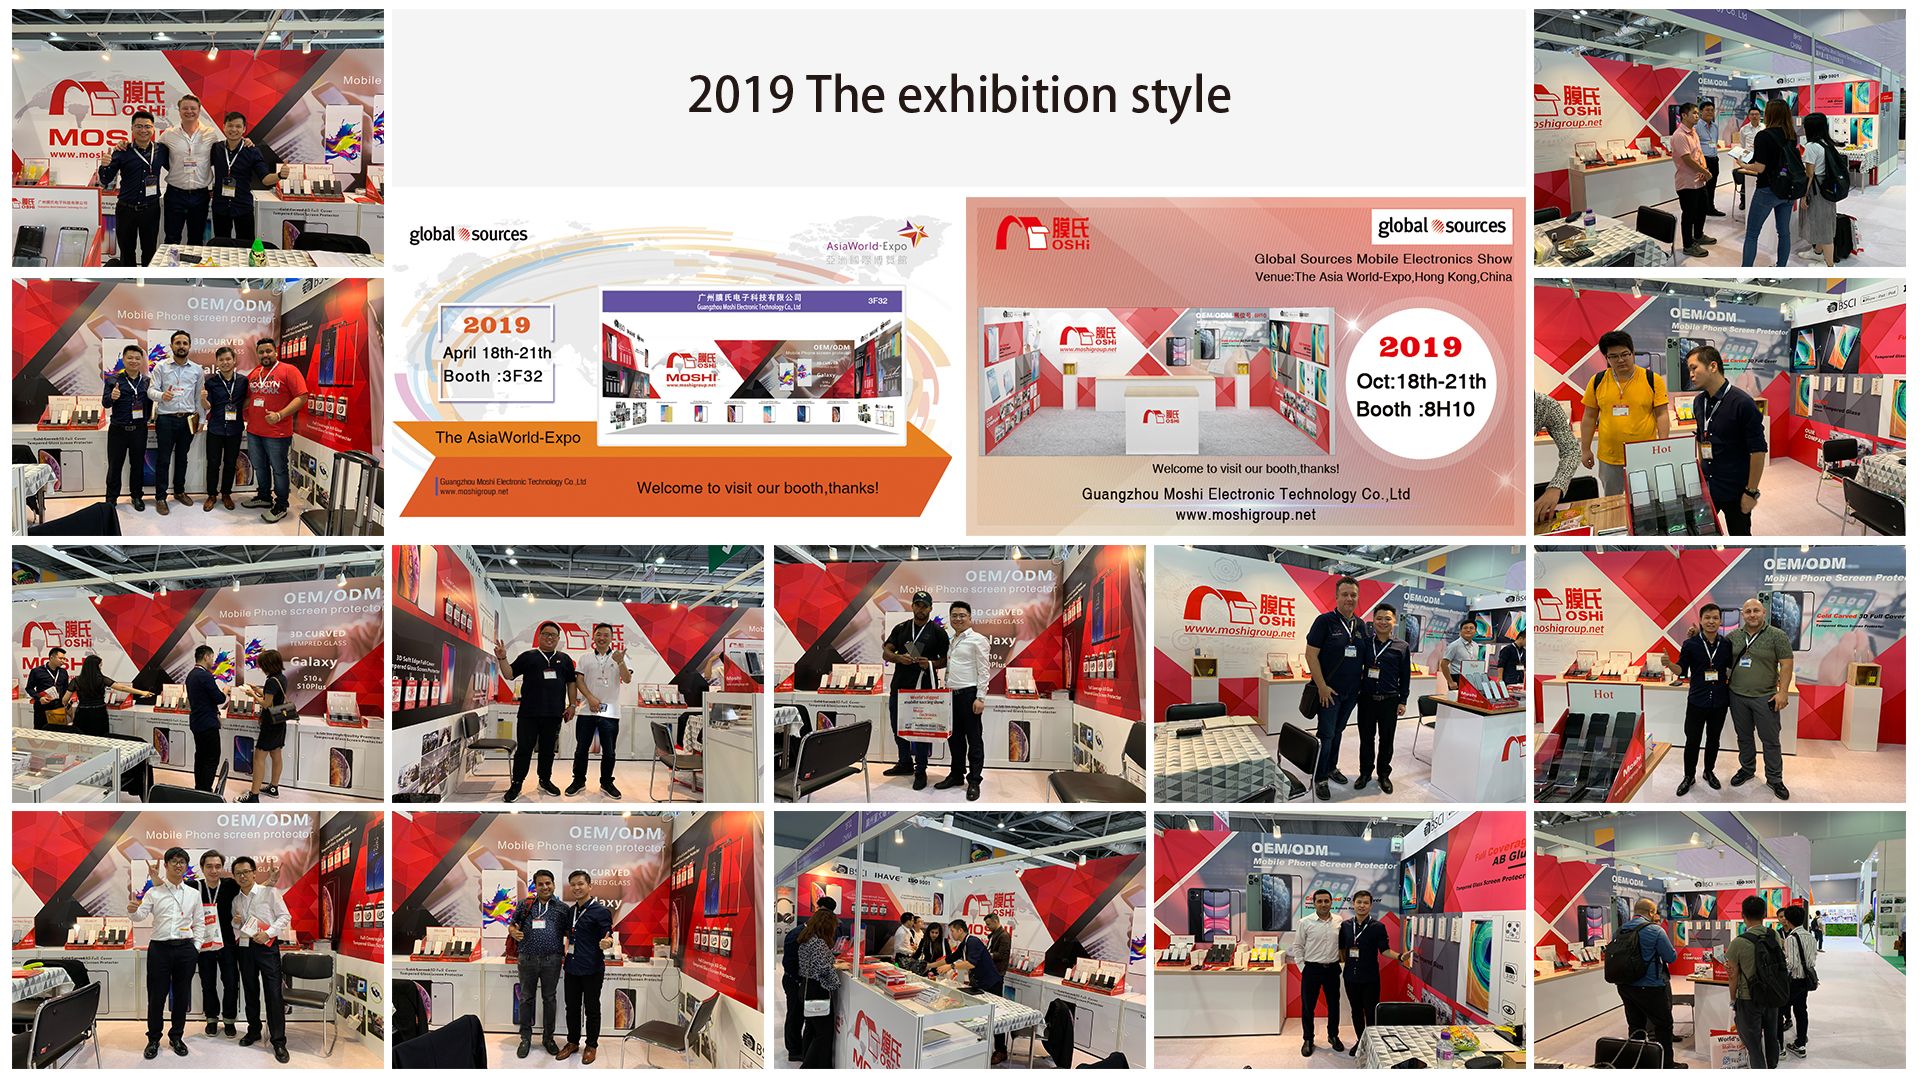 WEB-2019-The-Exhibition-Style